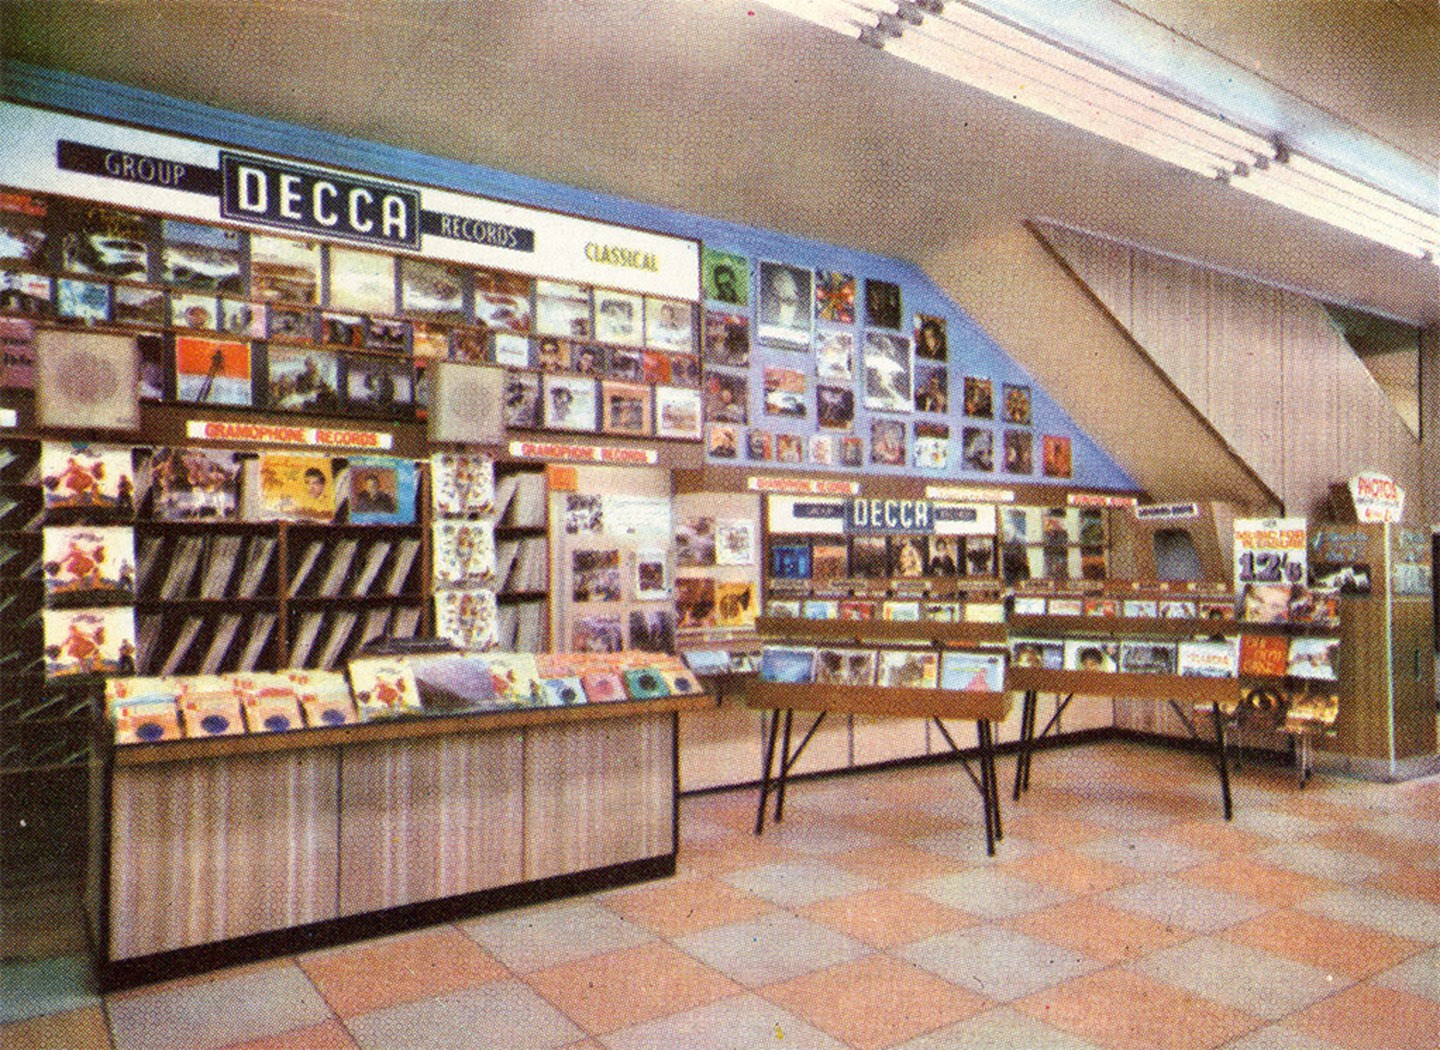 The ‘Record Corner’ tucked under the stairs in a Birmingham store in 1965